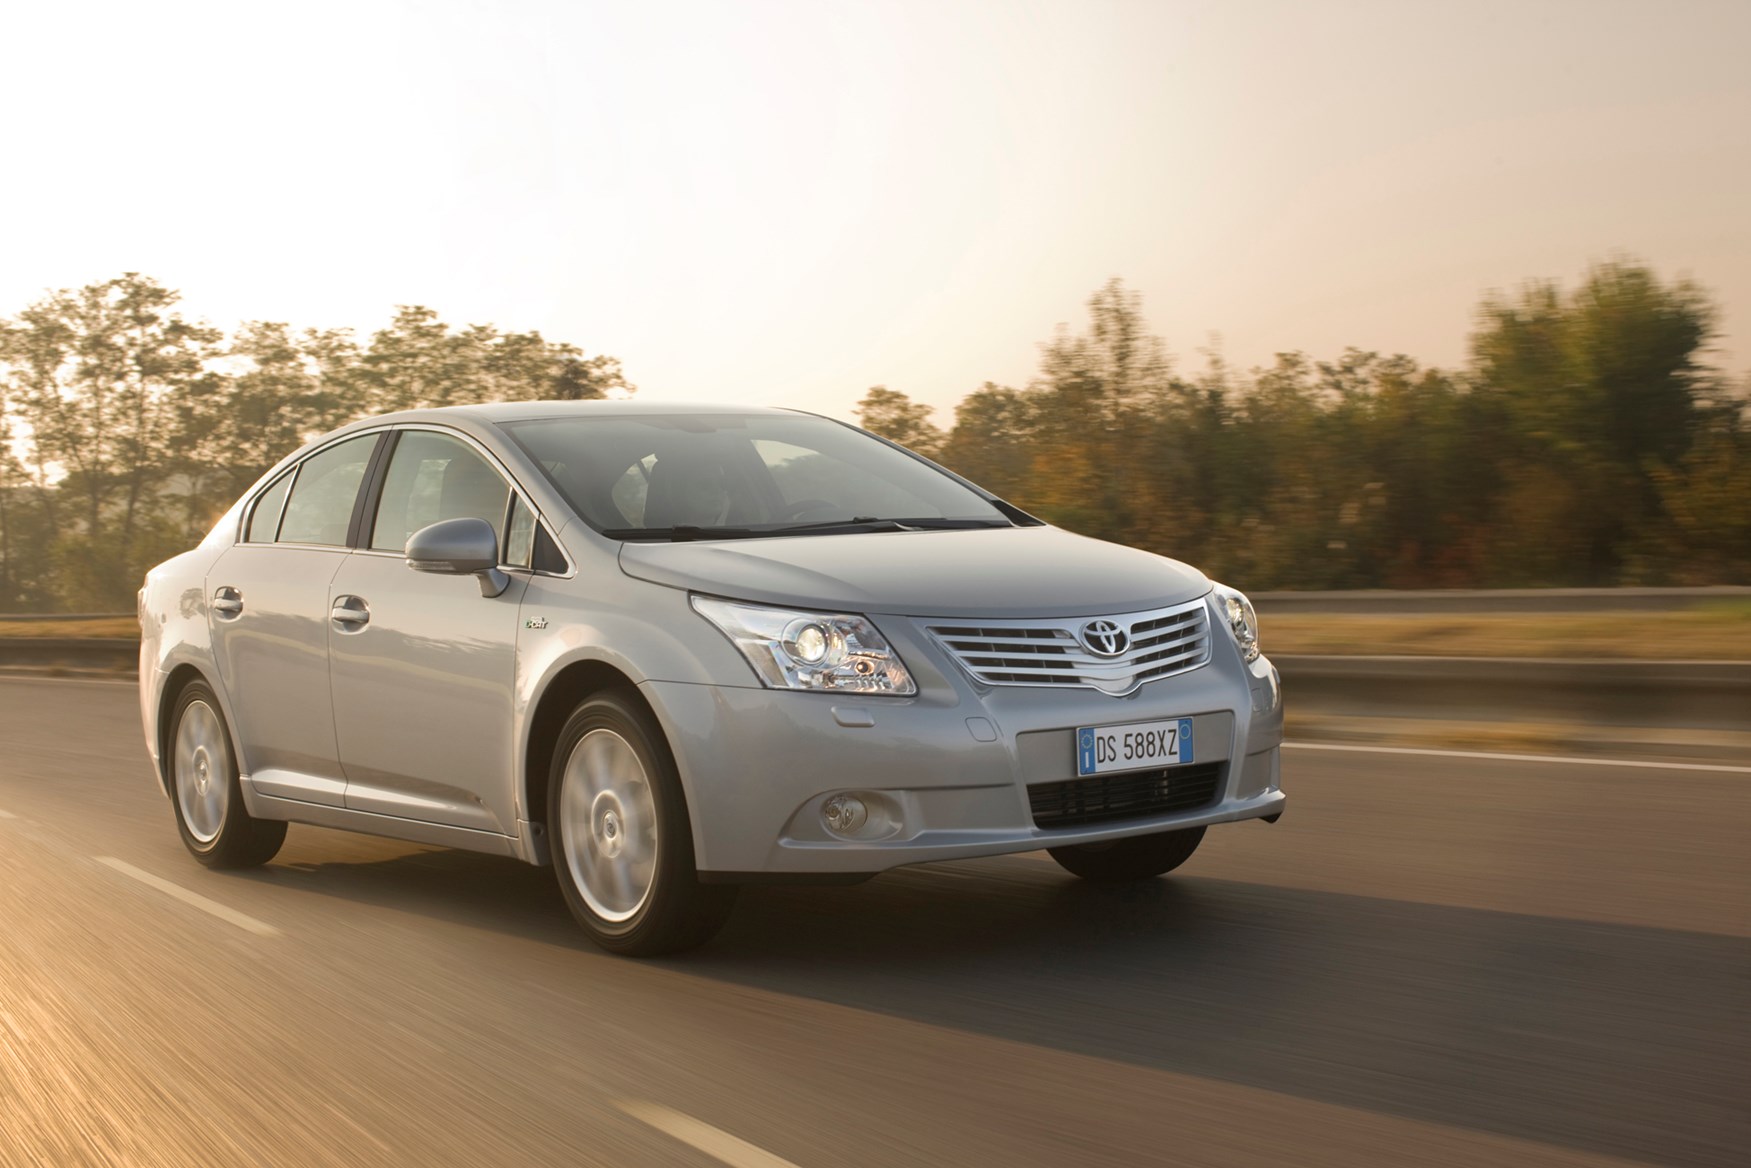 Used Toyota Avensis Saloon (2009 - 2018) Review | Parkers